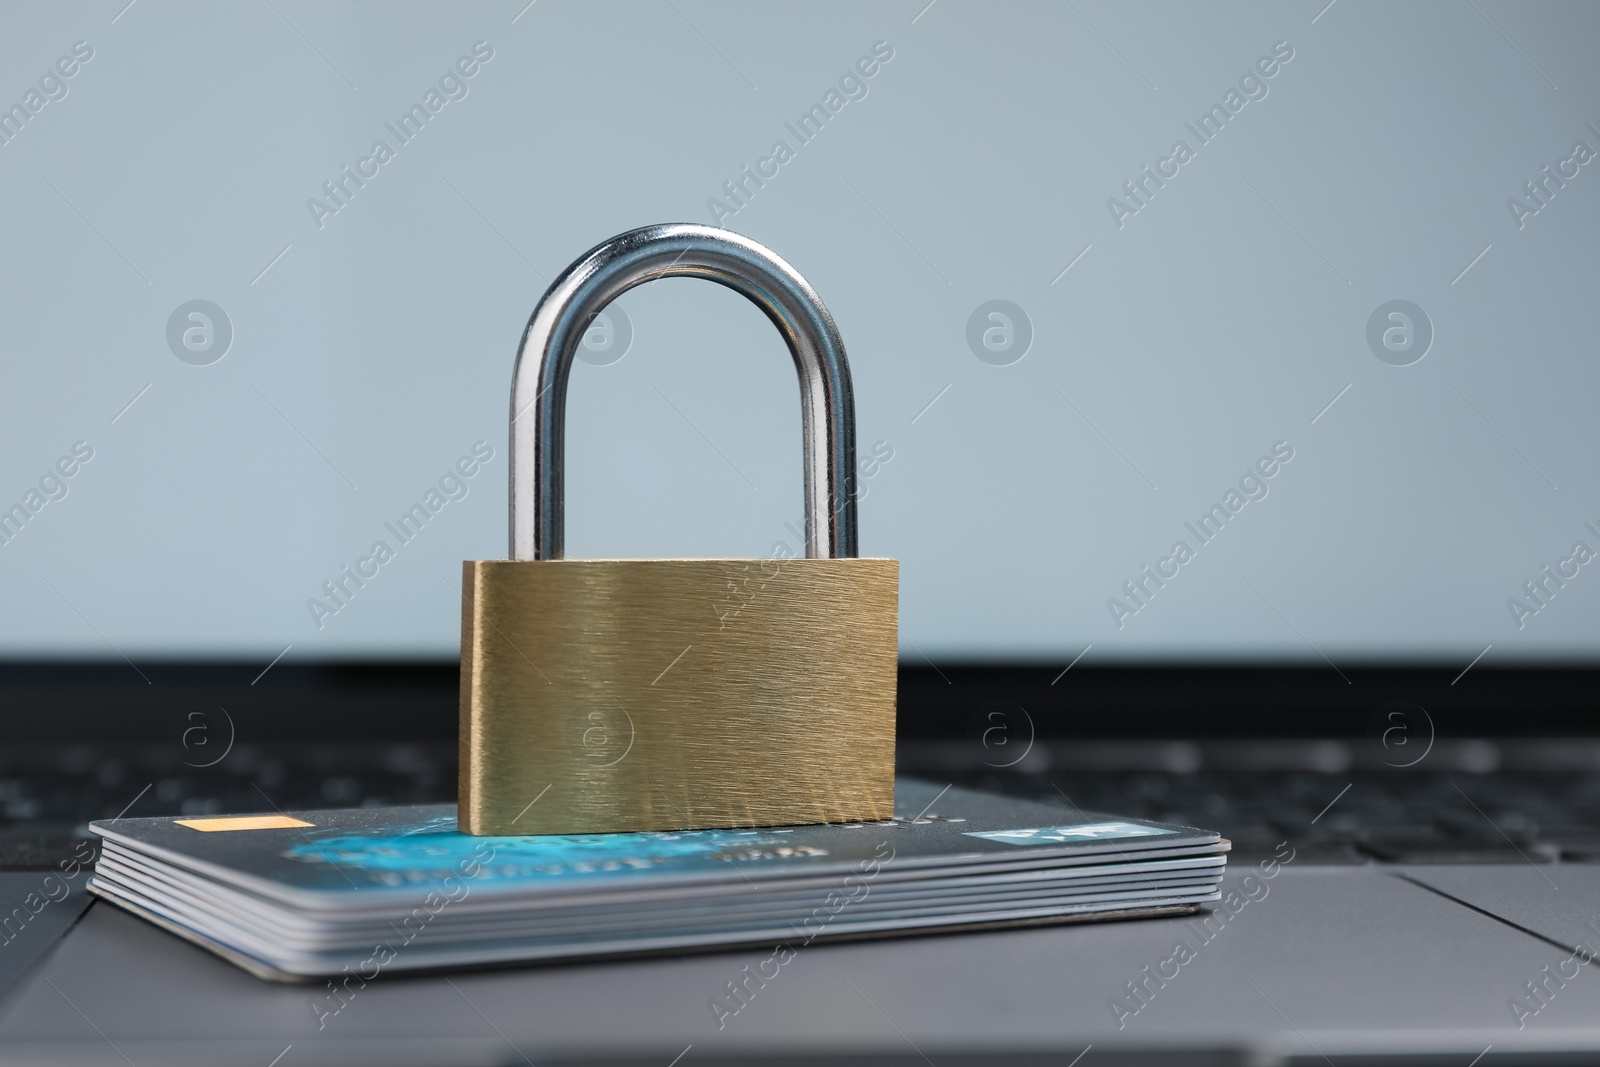 Photo of Cyber security. Metal padlock and credit cards on laptop, closeup. Space for text